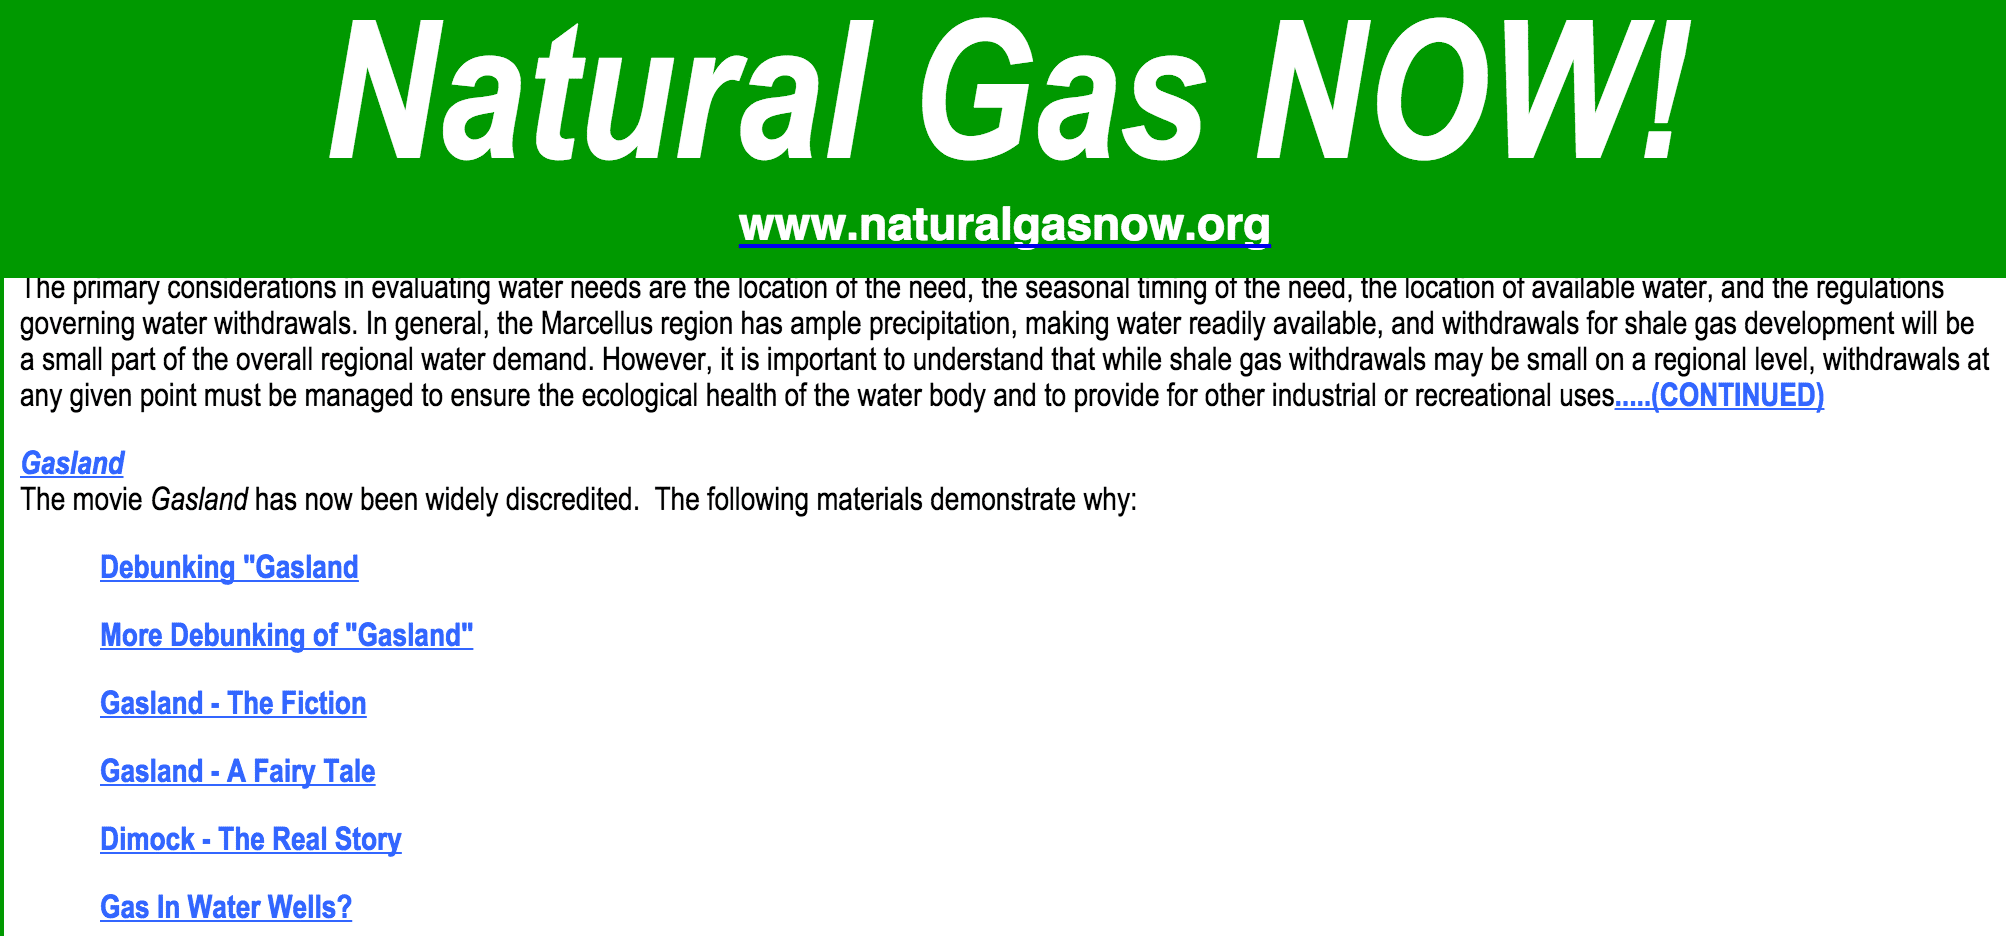 Natural Gas Now Energy in Depth Gasland